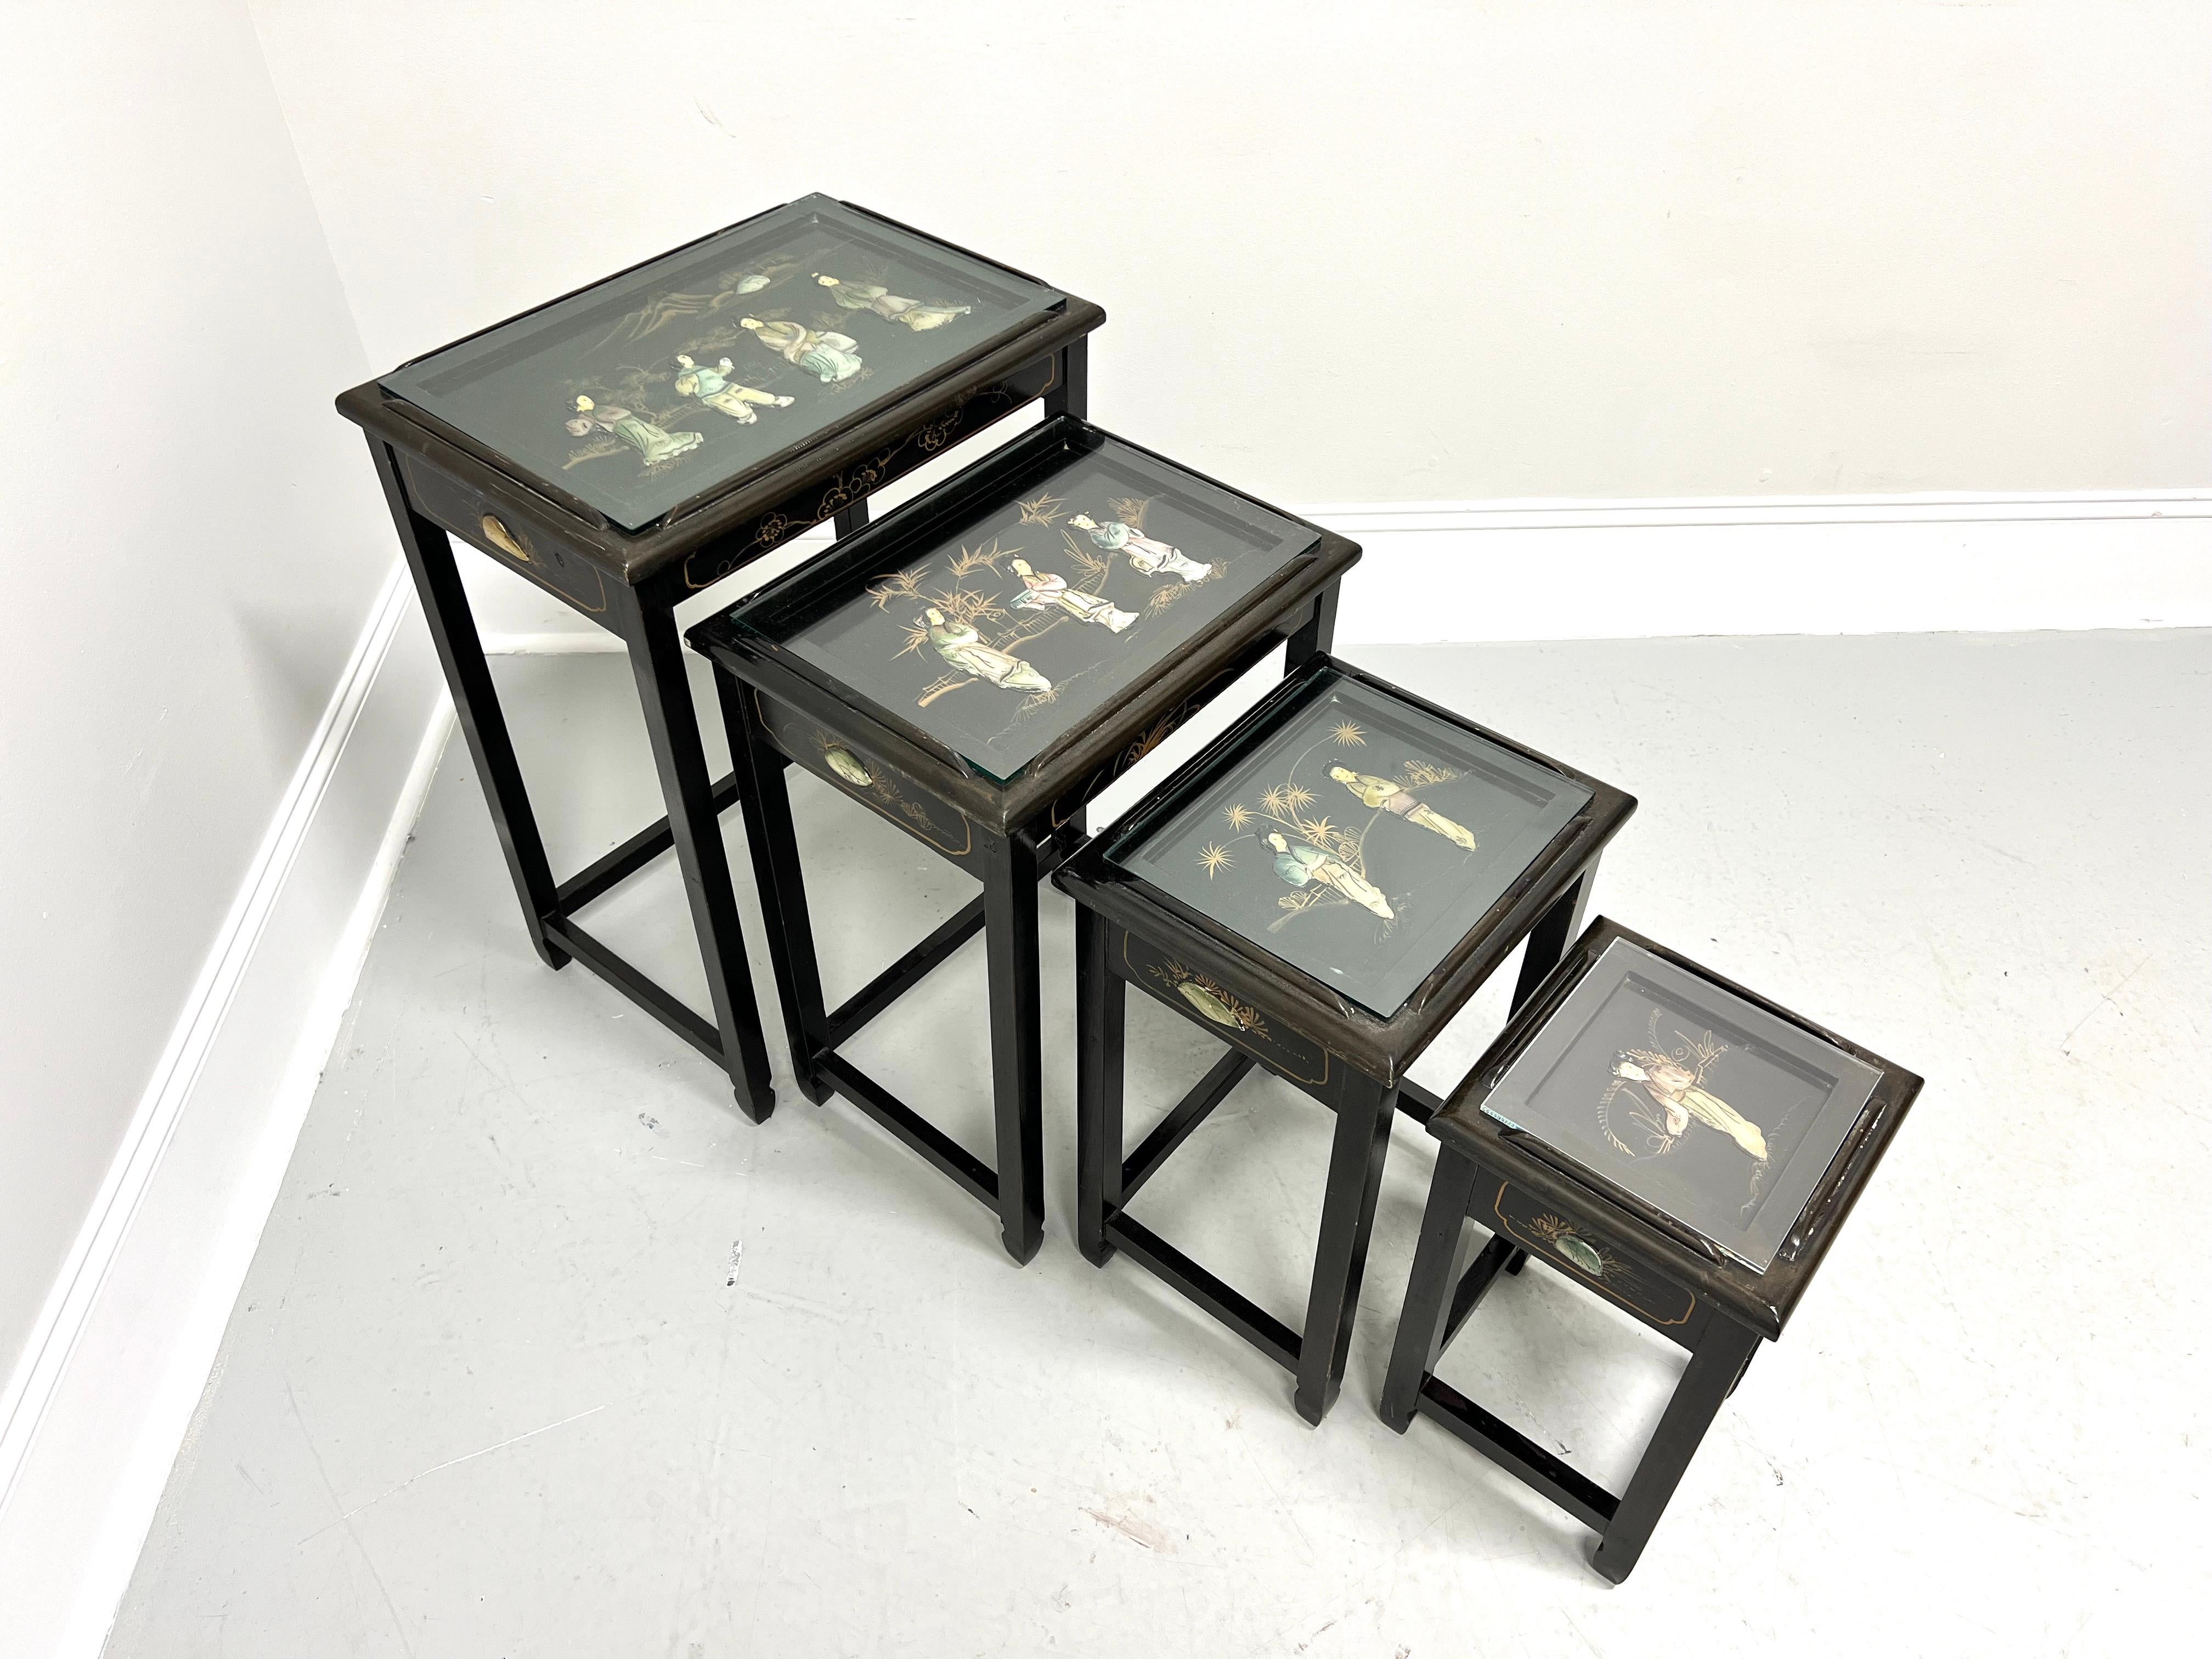 1980's Chinese Export Black Lacquer Hand Painted Nesting Tables - Set of 4 For Sale 6